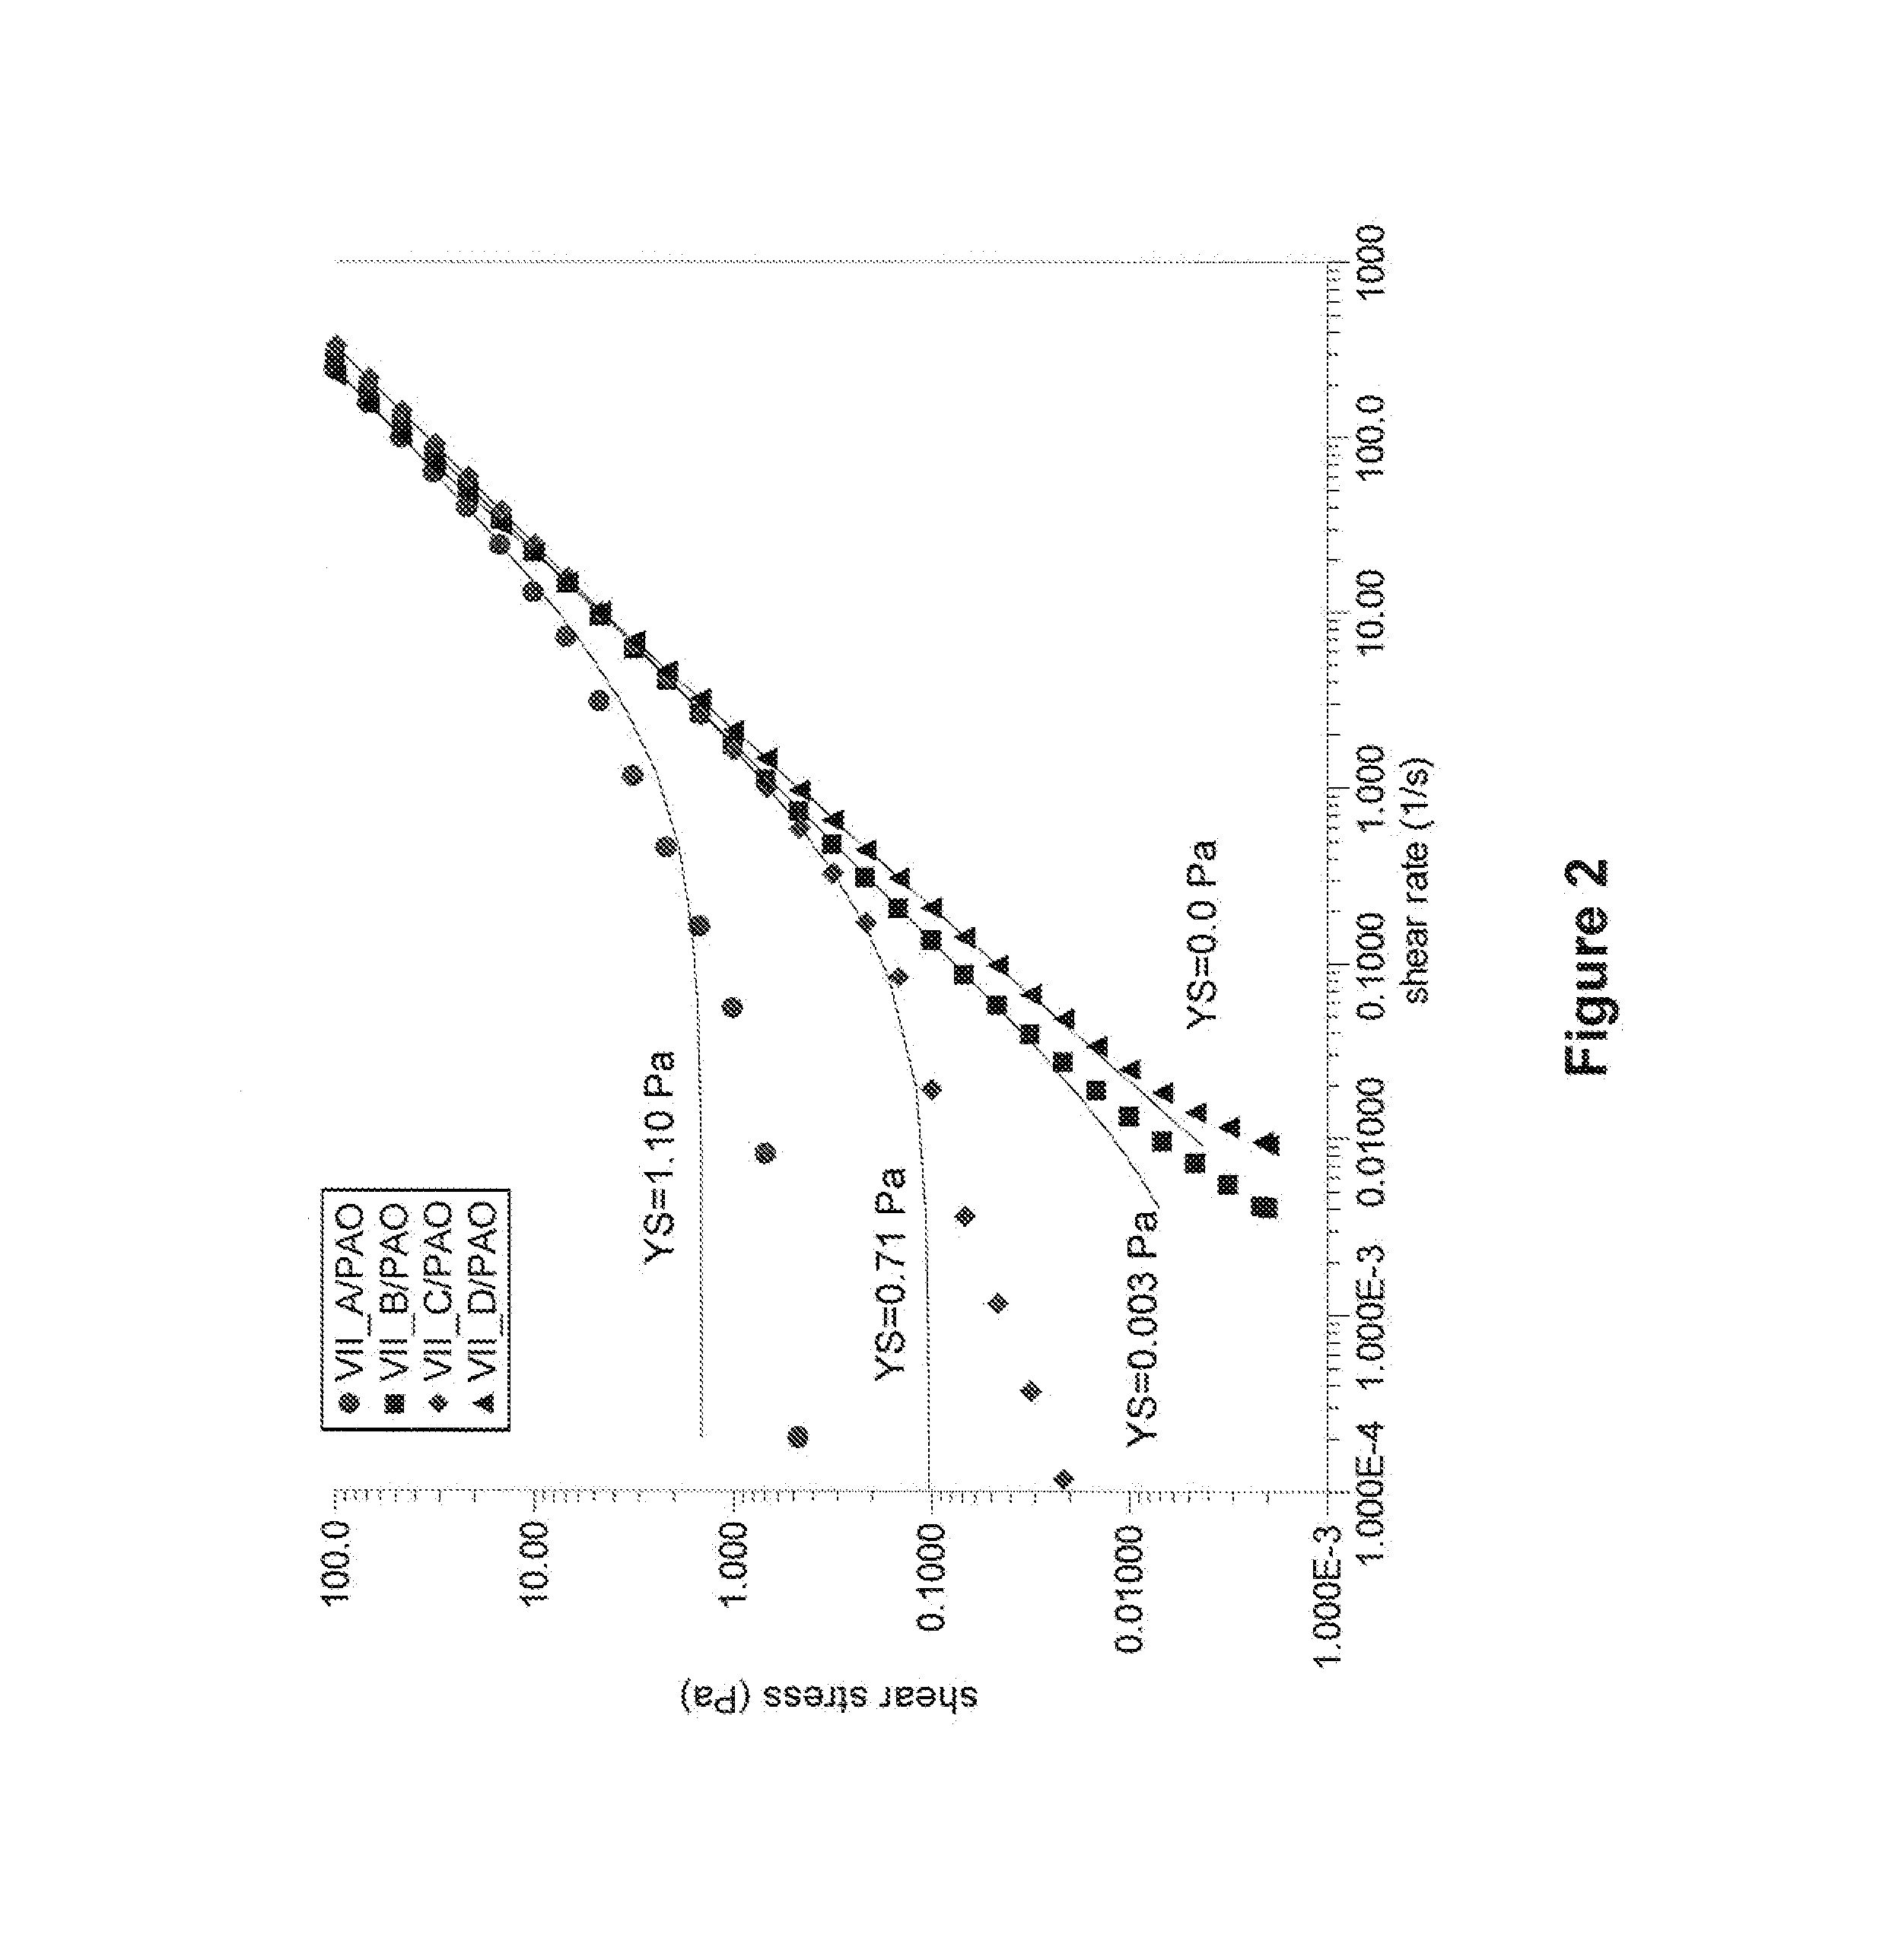 Rheological methods to determine the predisposition of a polymer to form network or gel